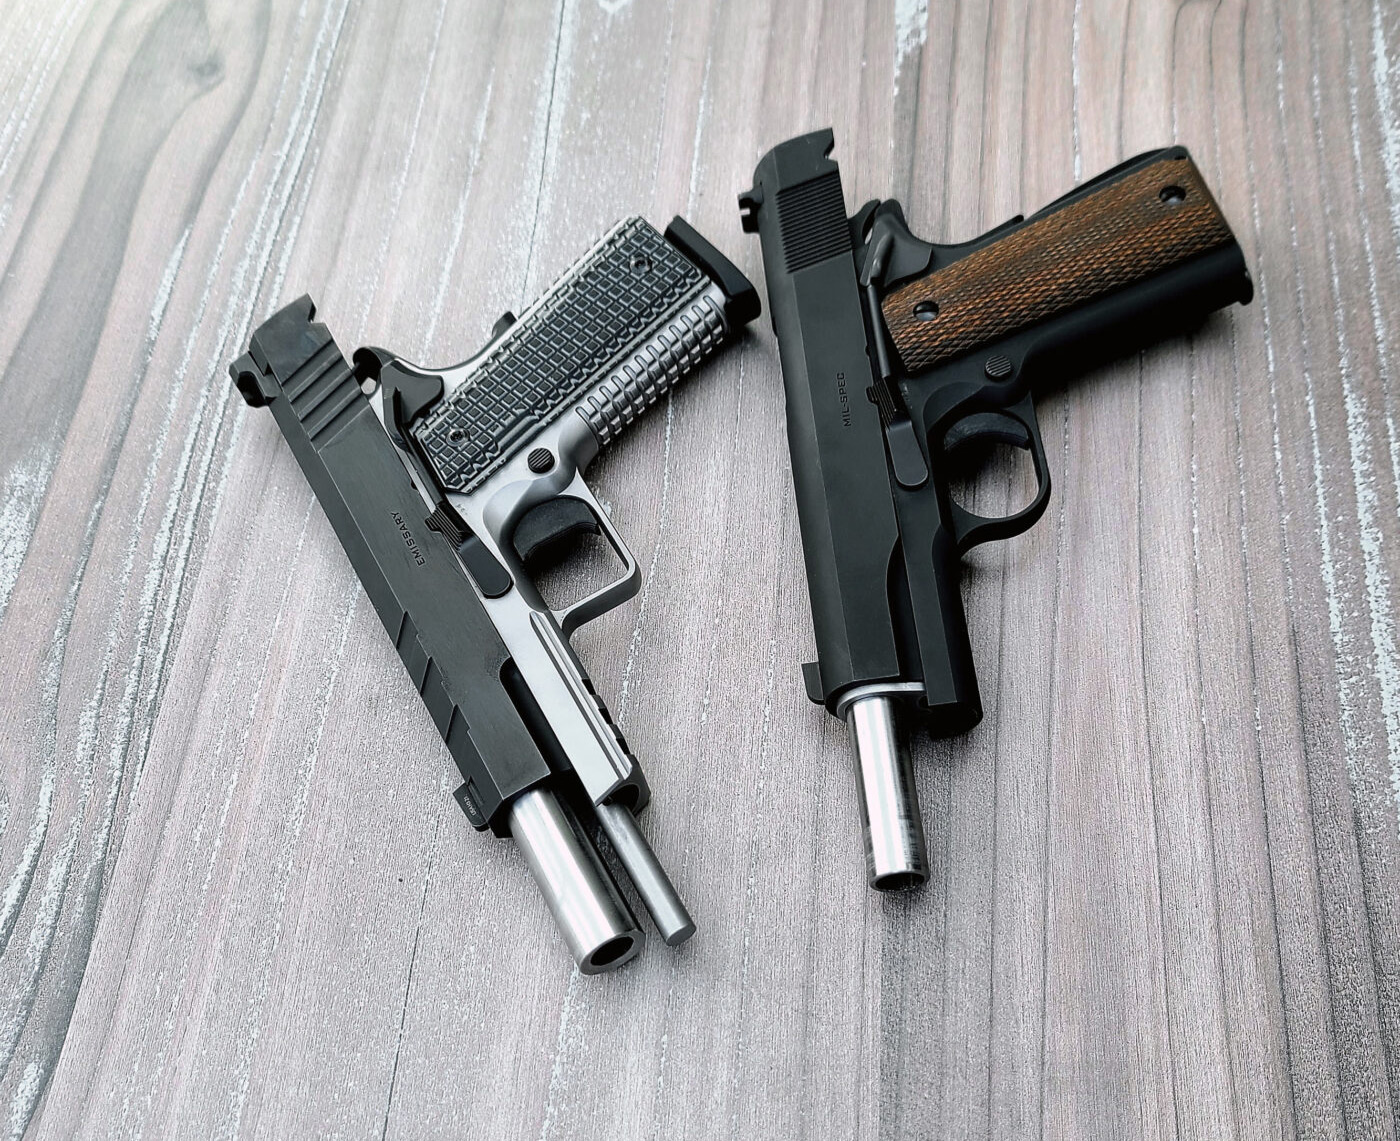 Two 1911 pistols from Springfield Armory